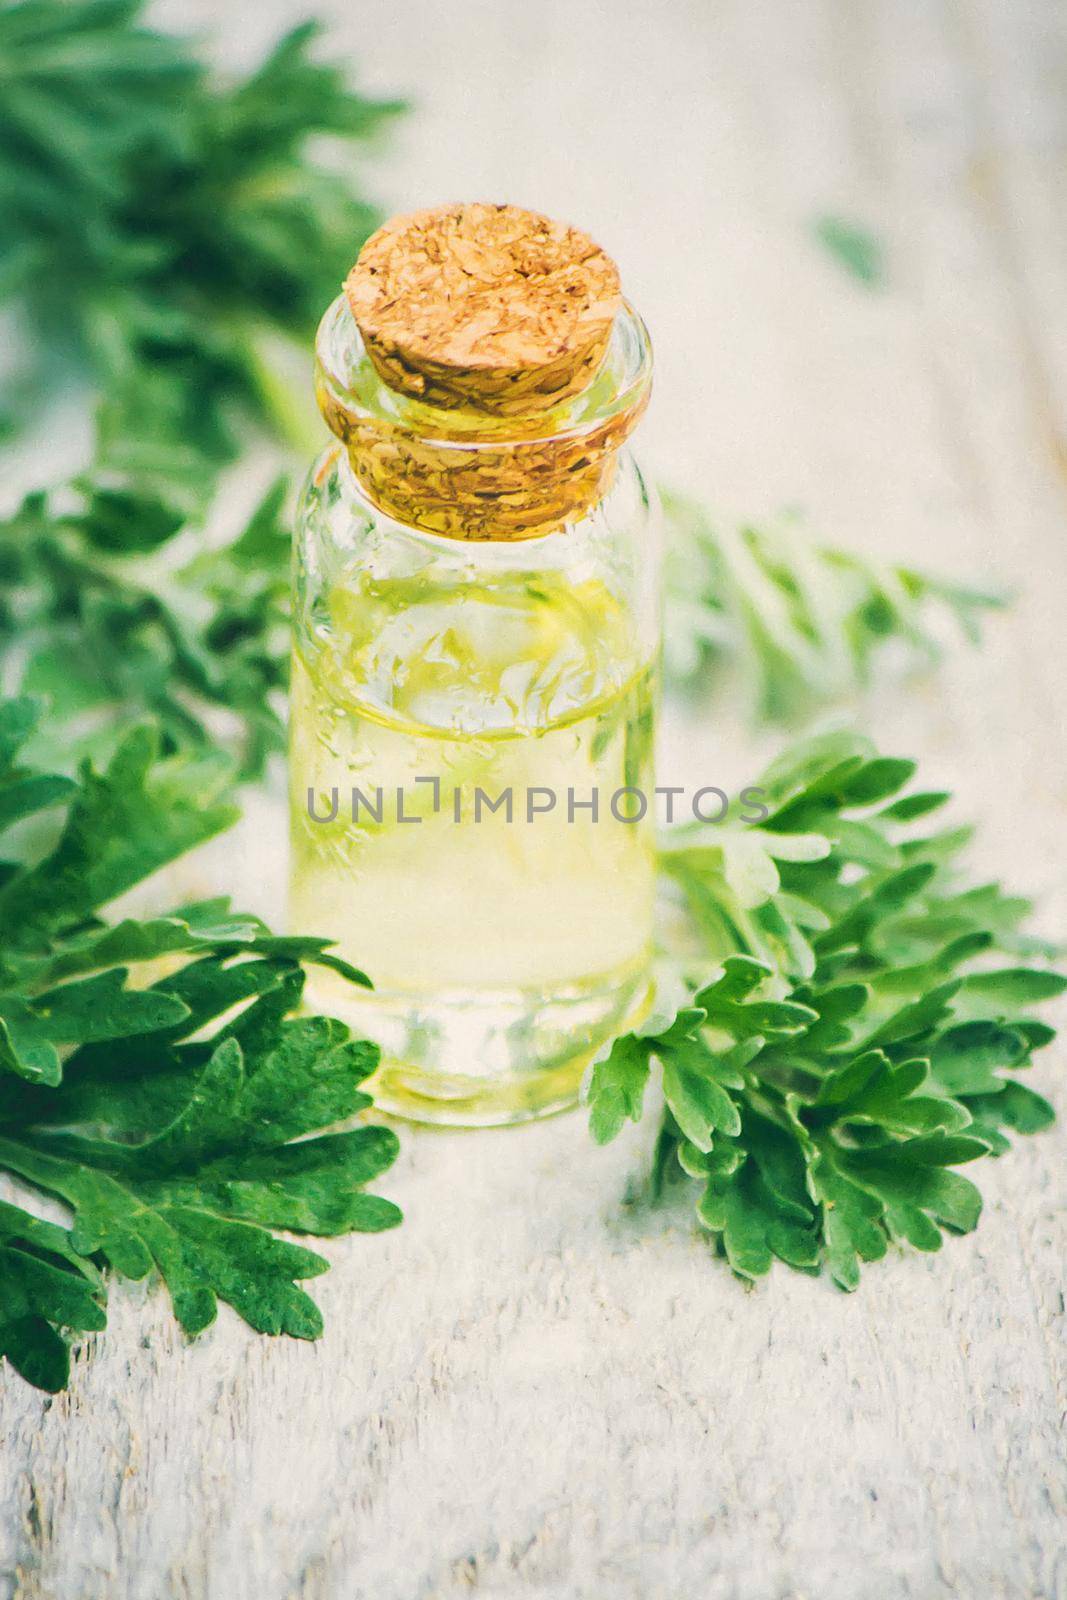 wormwood extract in a small jar. Selective focus. nature.